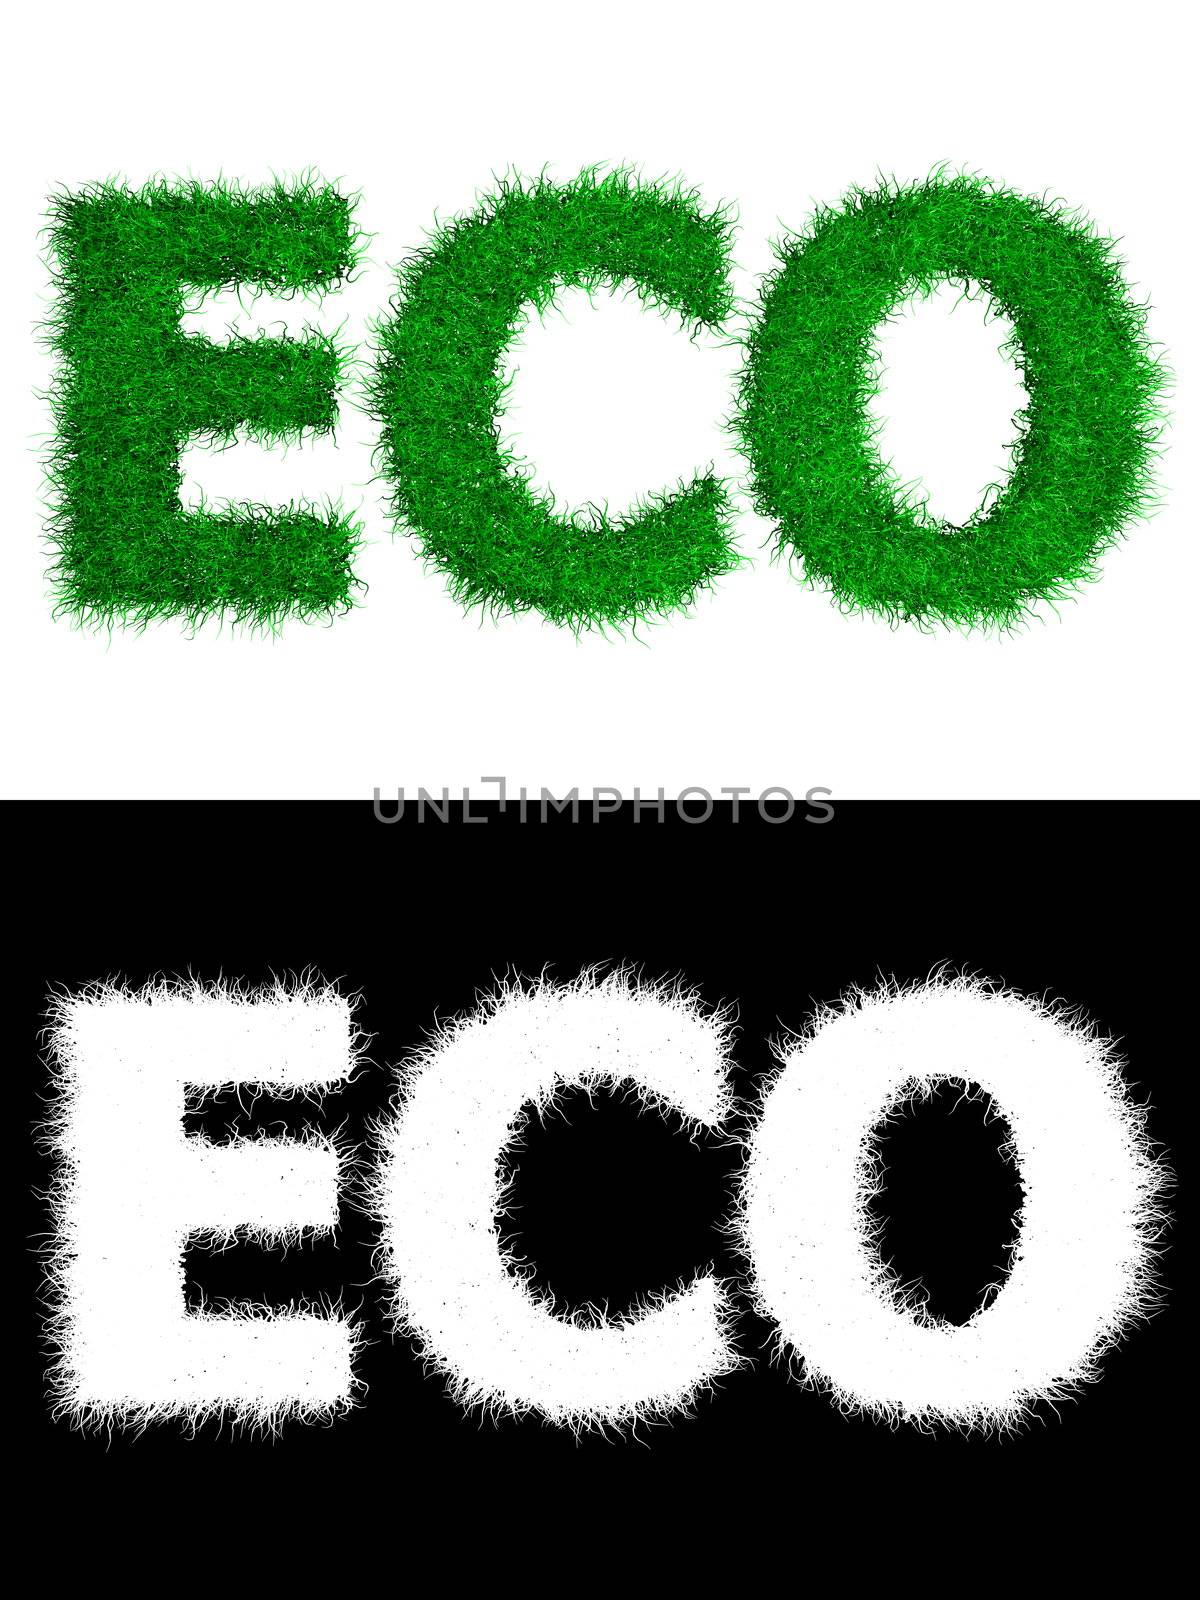 word ECO made of grass - isolated on white - alpha mask included